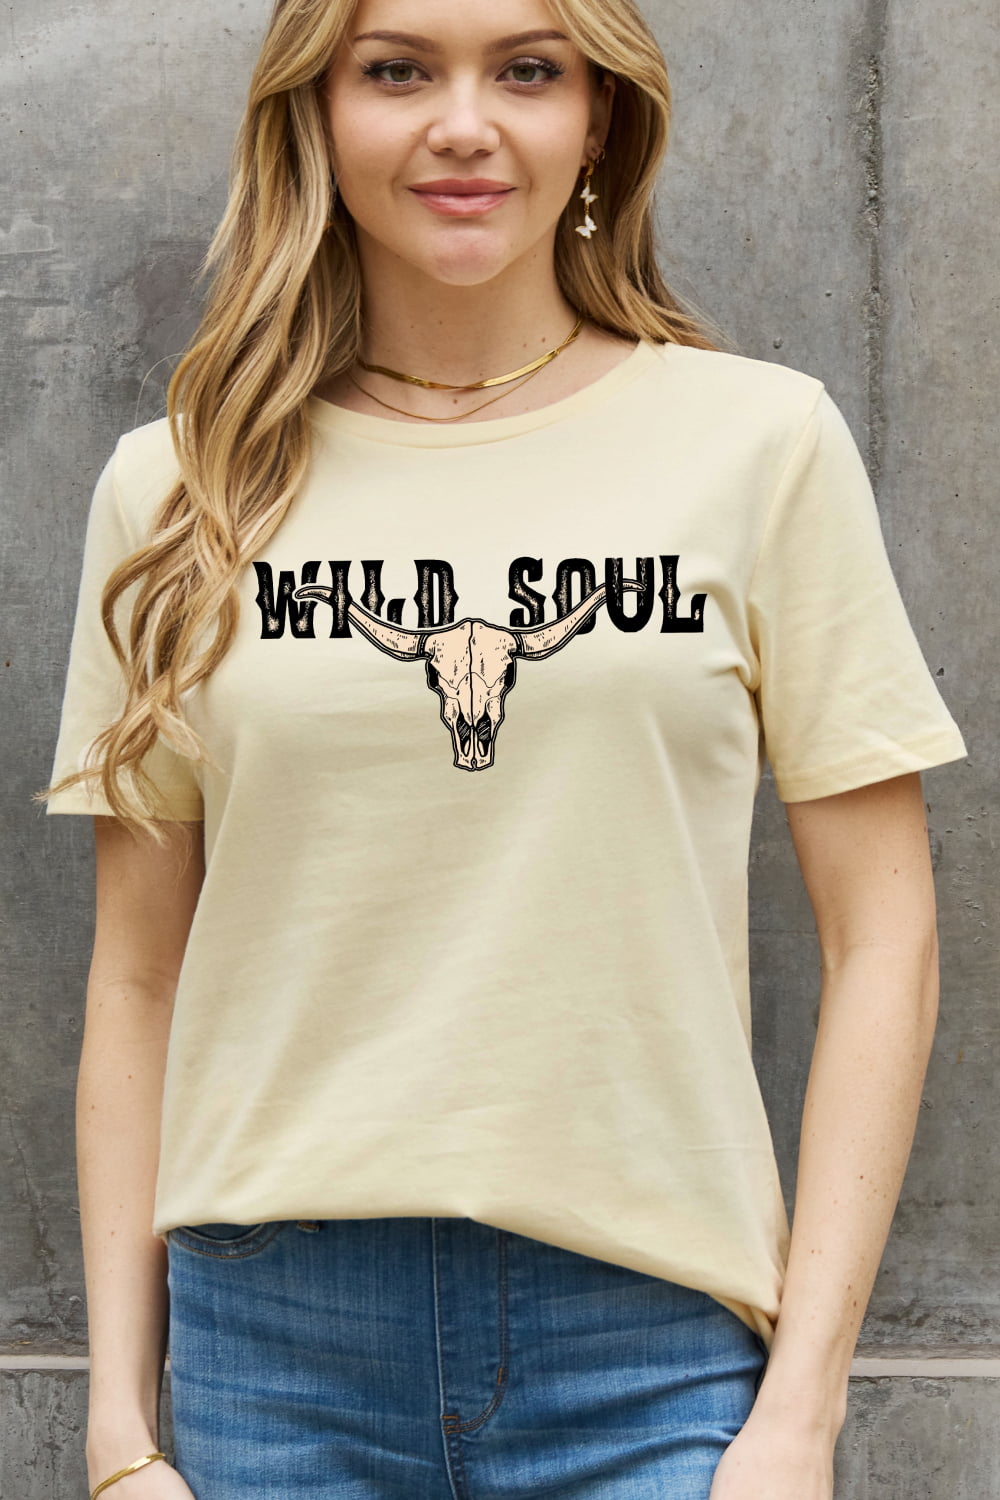 Simply Love Full Size WILD SOUL Graphic Cotton Tee